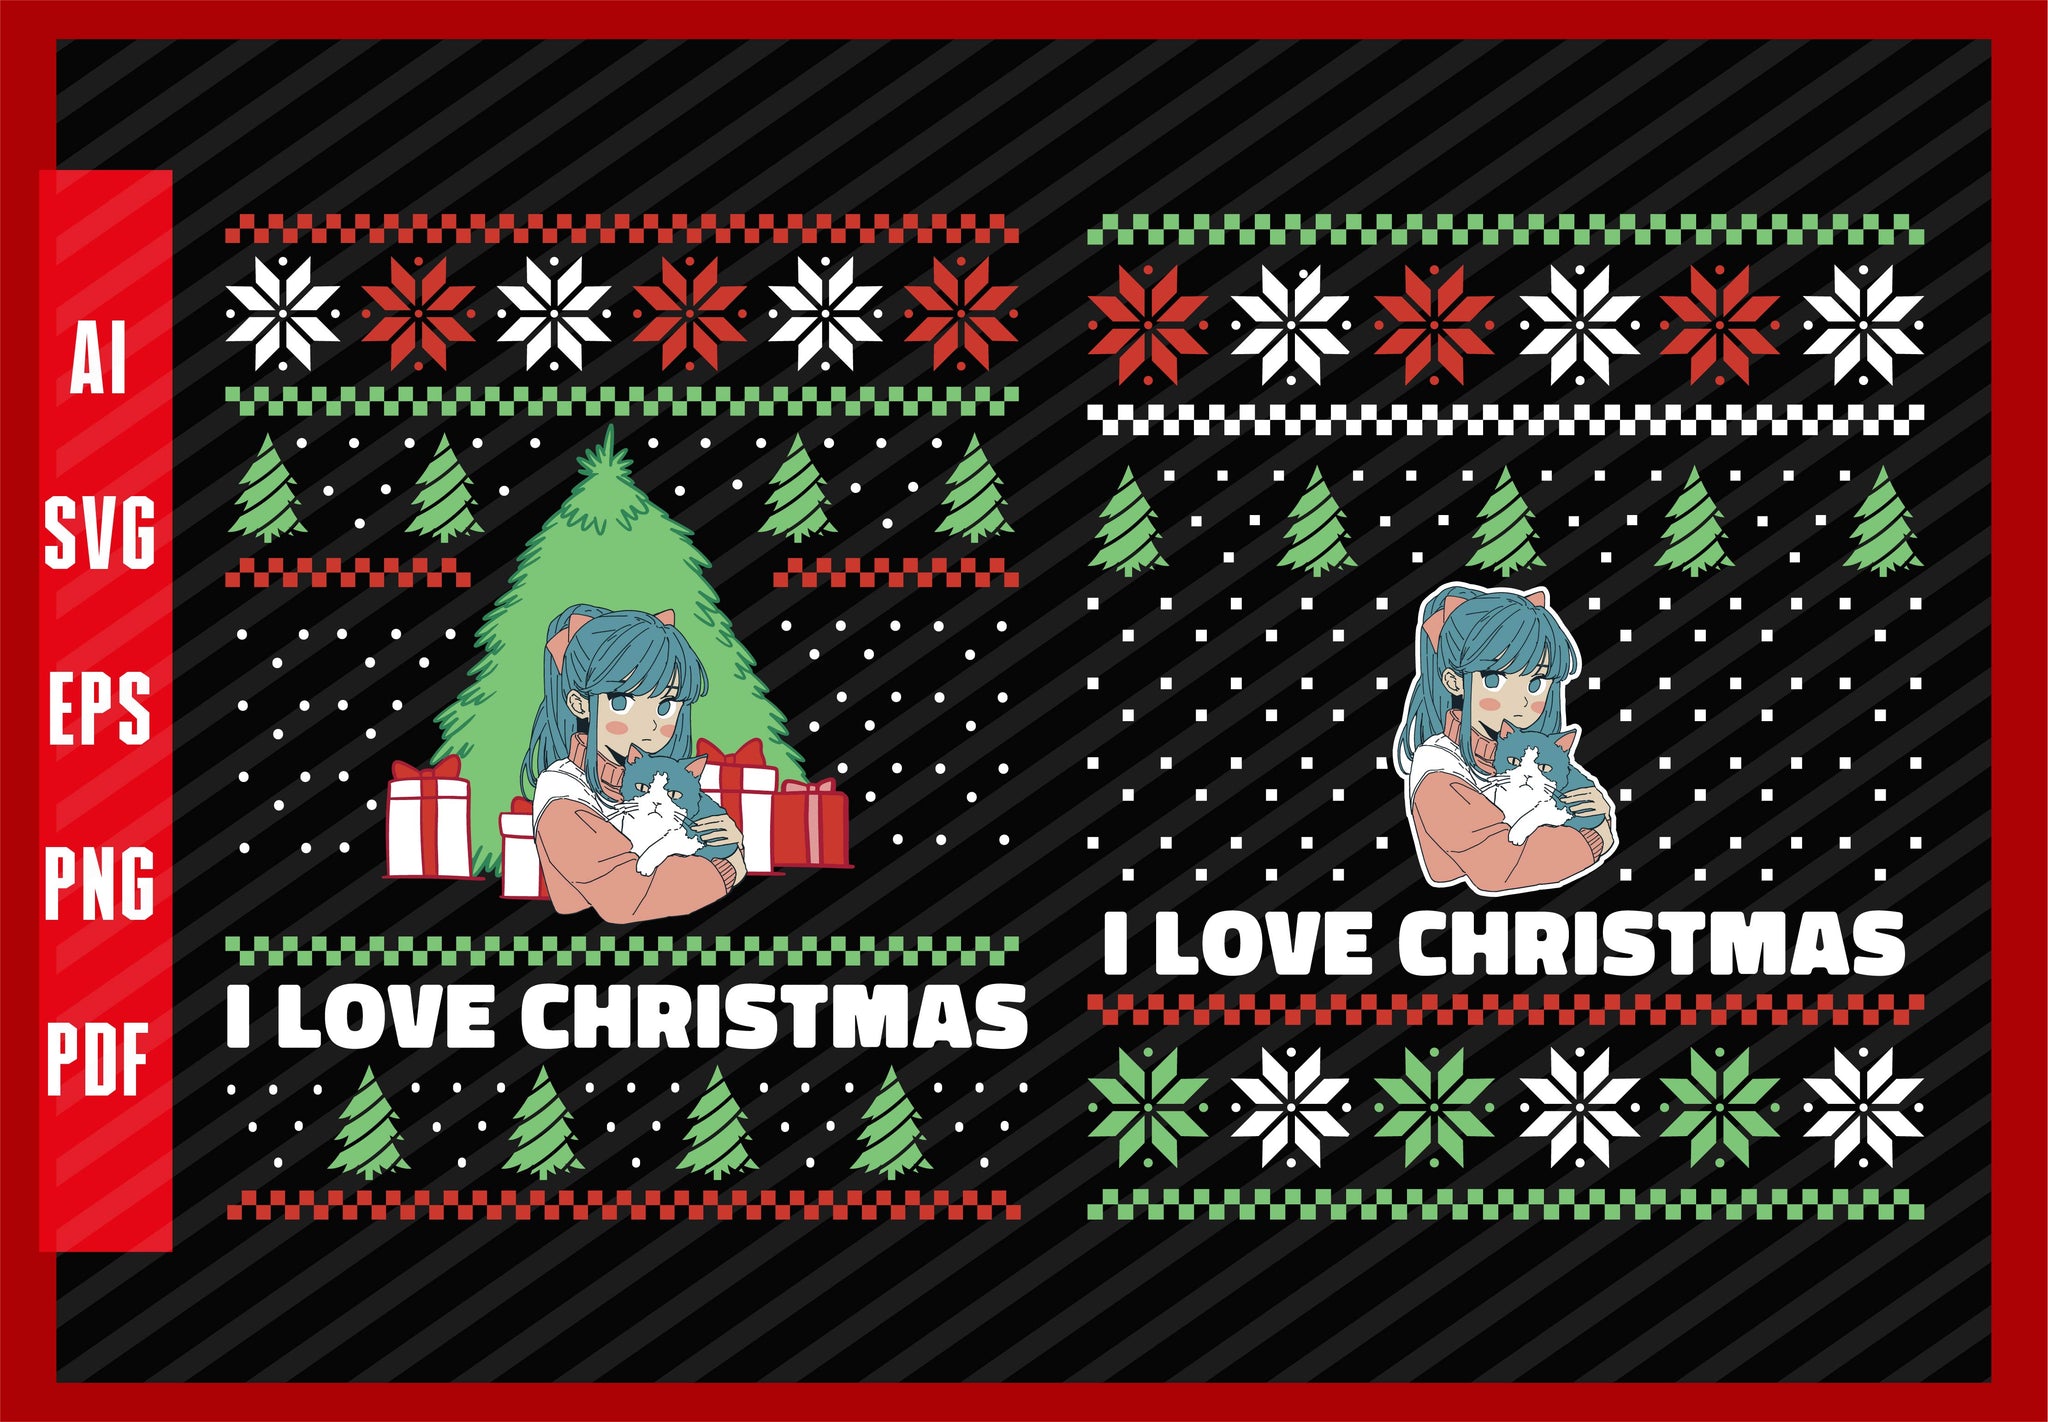 Anime Girl with a Cat Lover Design, I Love Christmas T-Shirt Design Eps, Ai, Png, Svg and Pdf Printable Files